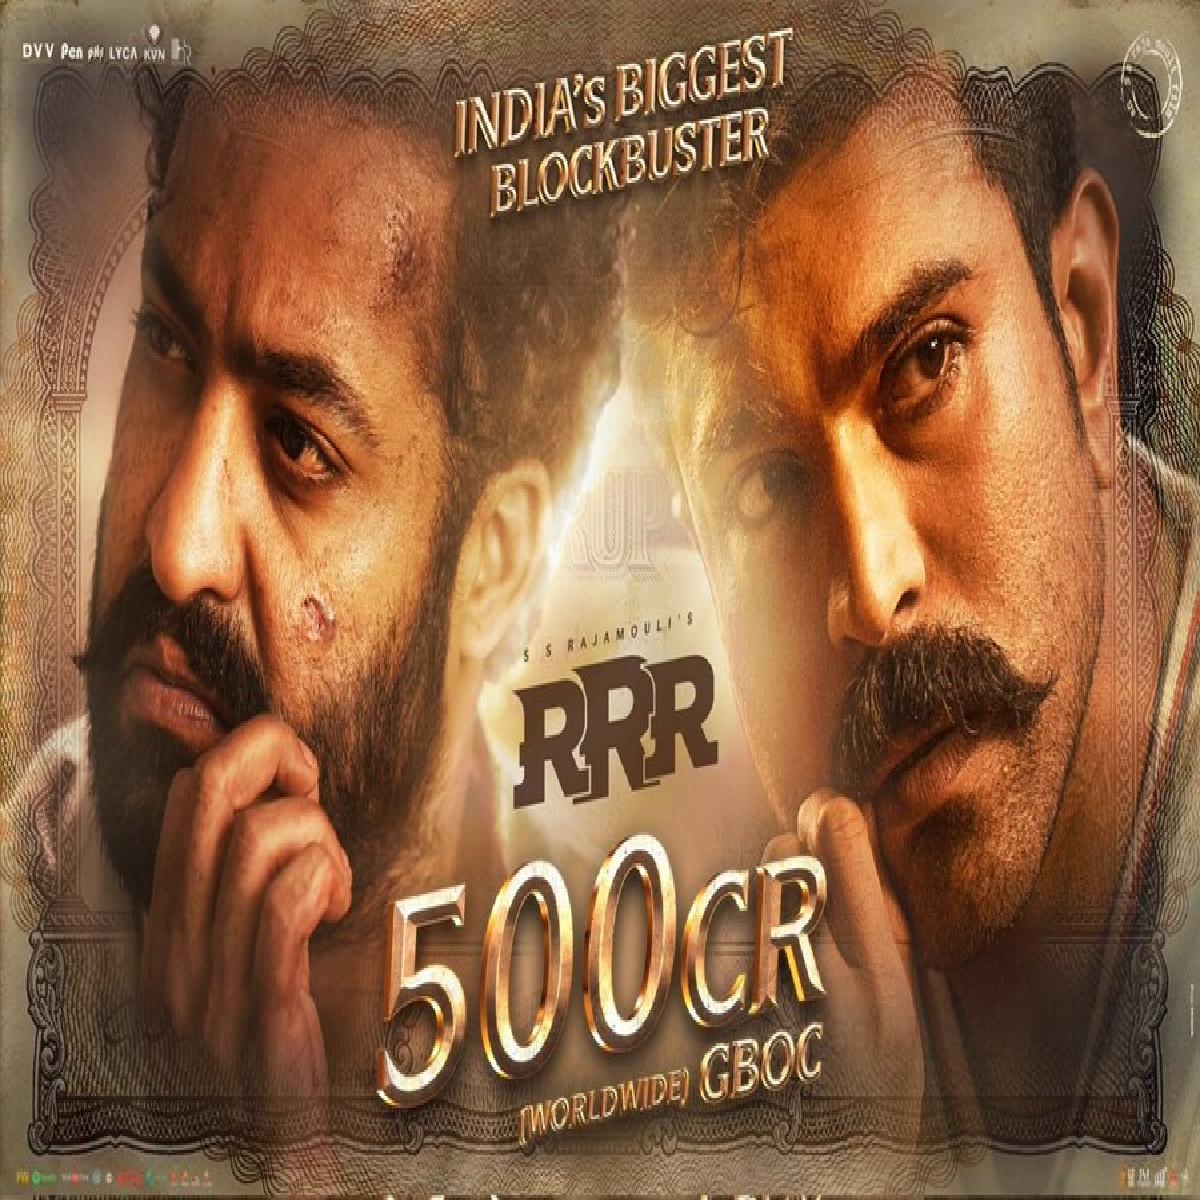 RRR Mint 500 Cr At The Box-Office